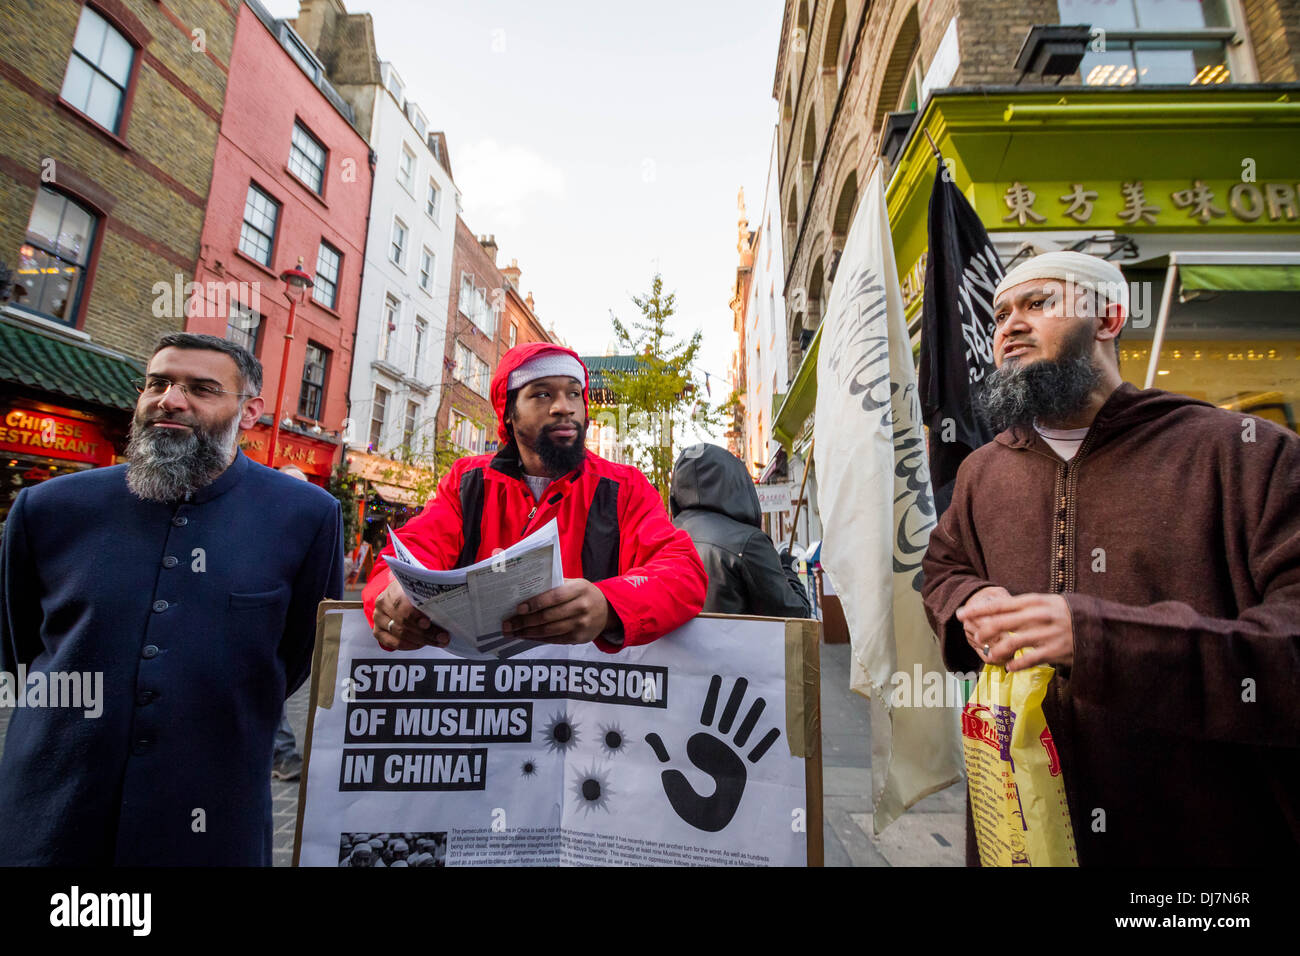 Radical Islamists including Anjem Choudary (L) and Ricardo McFarlane (C) protesting in London’s Chinatown, UK. Stock Photo